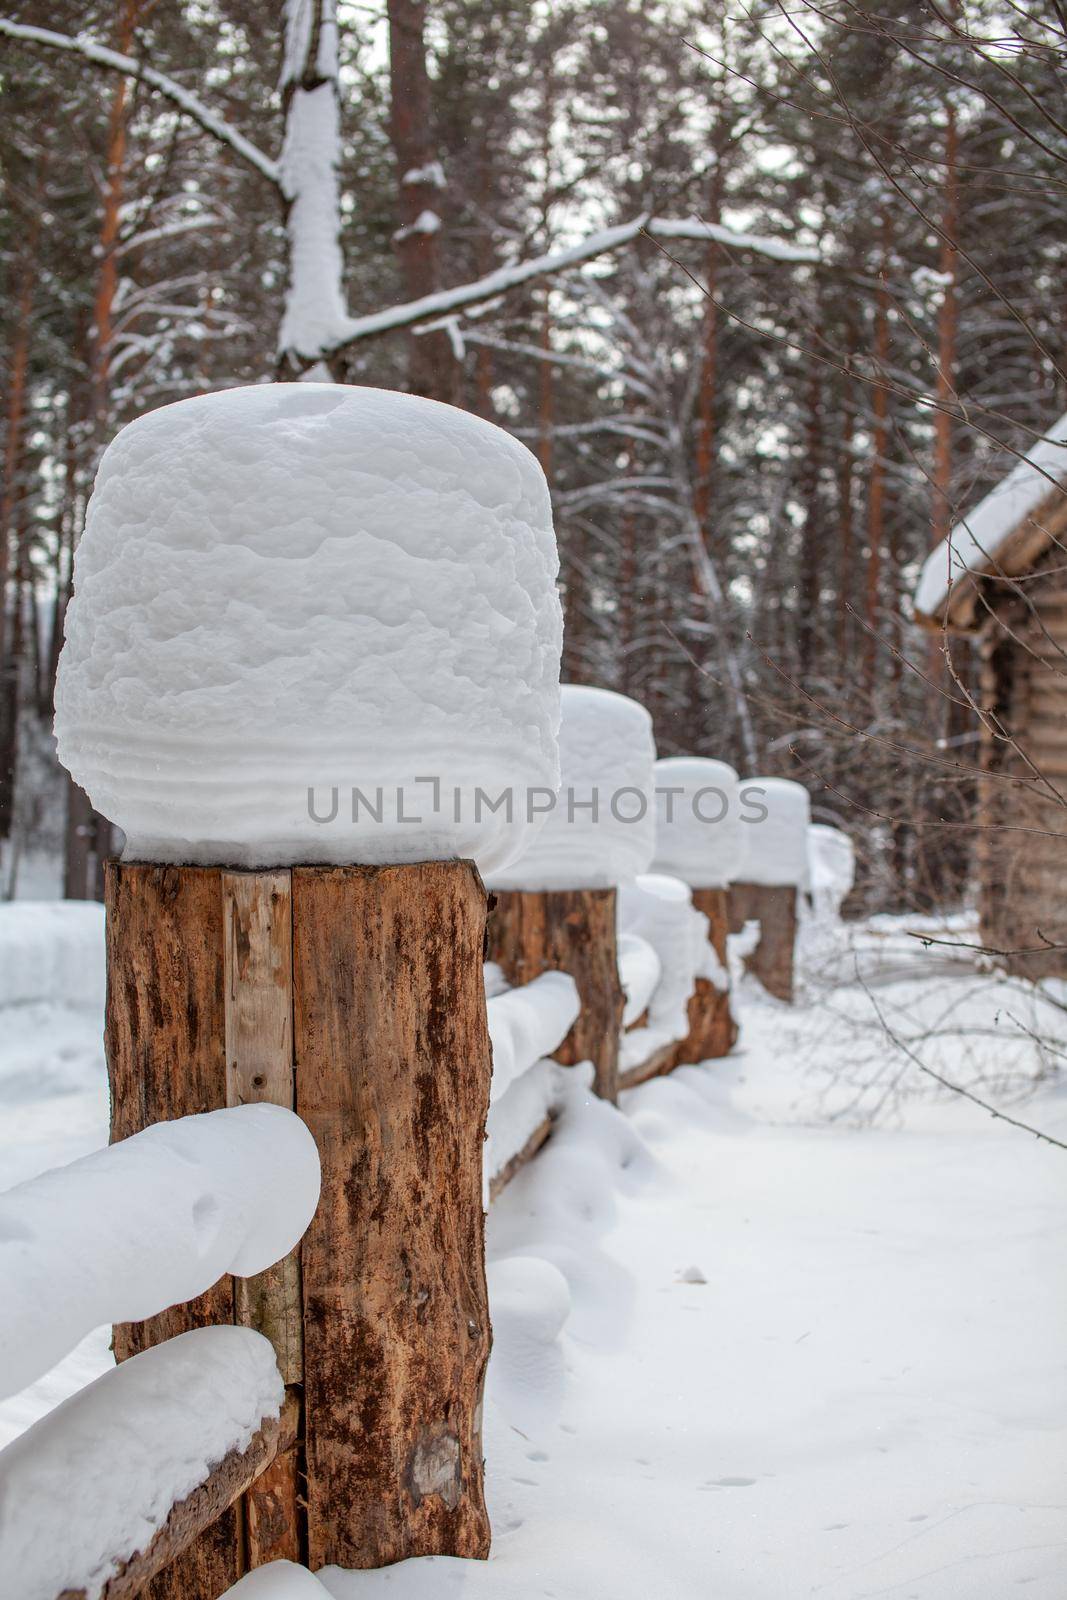 Large snow caps on the stumps of the fence in winter. A wooden fence protects the territory of the house.